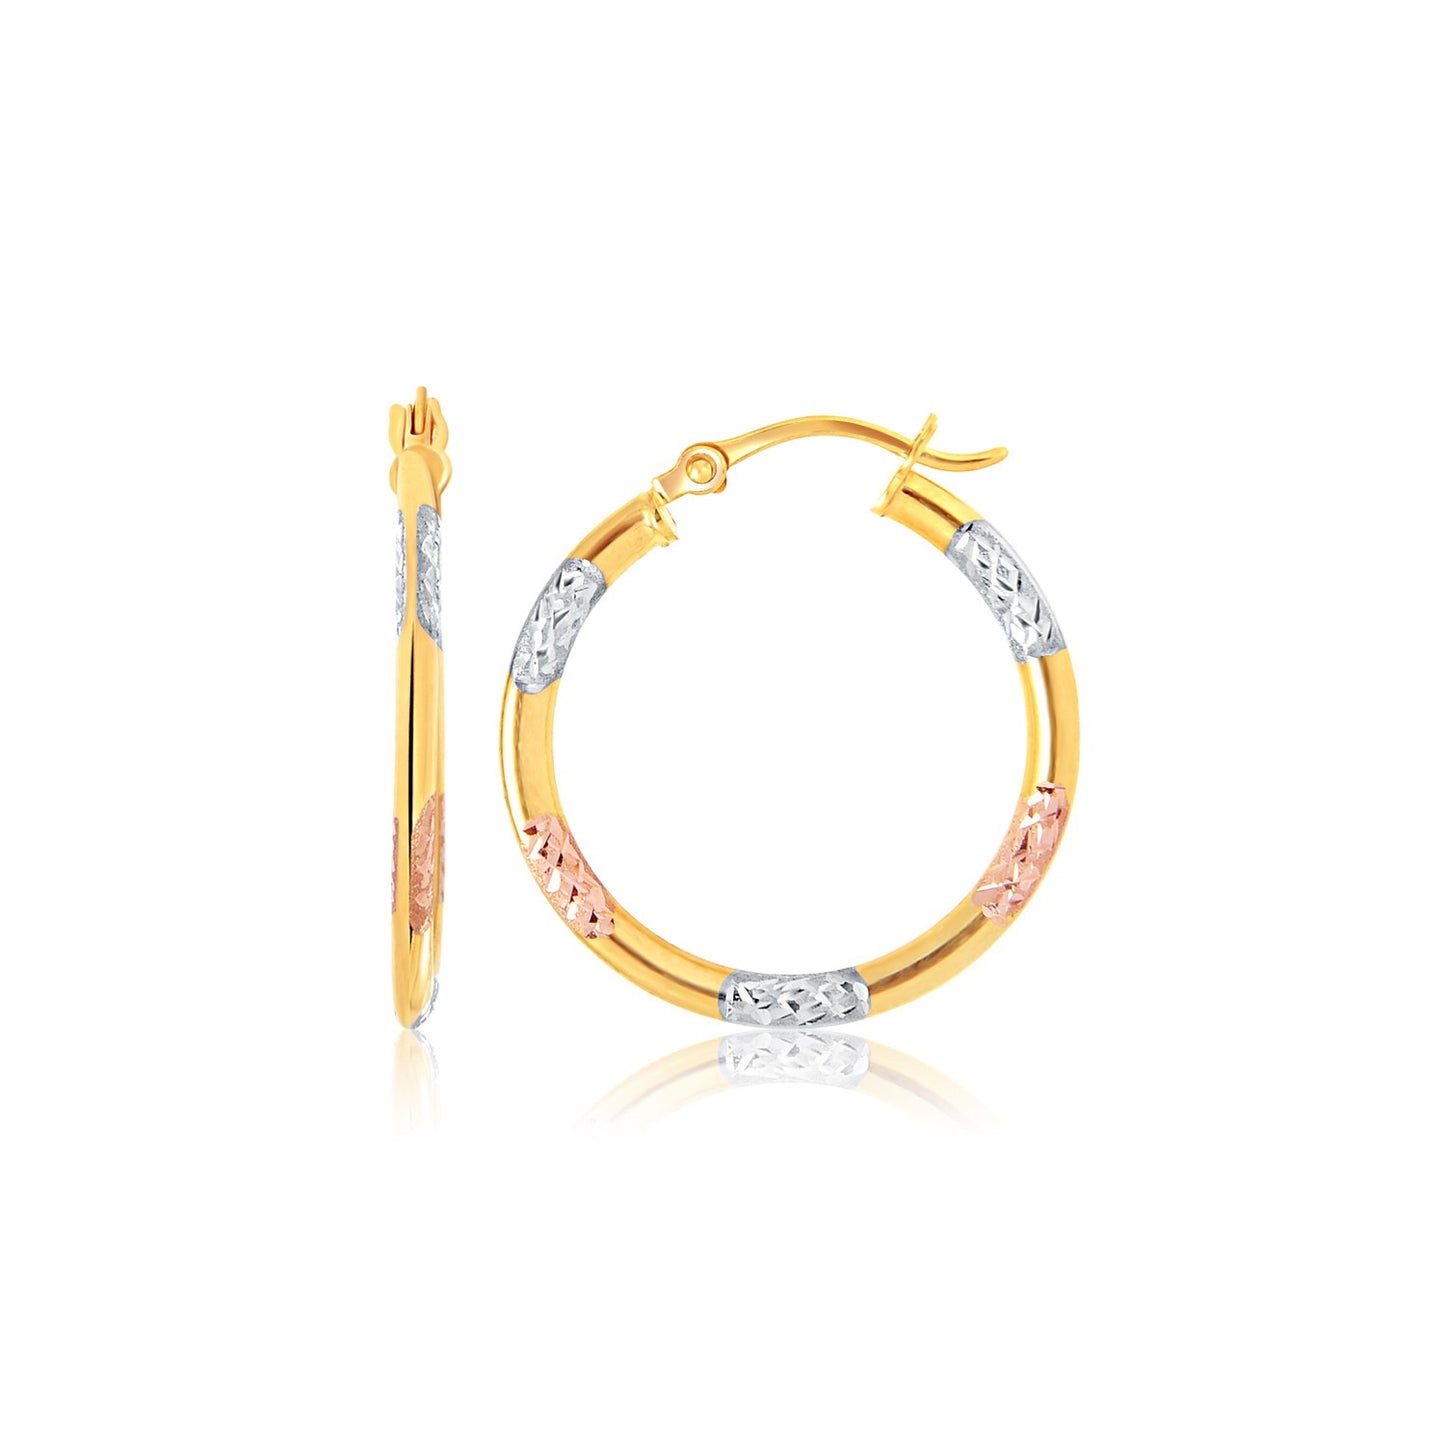 Tri-Color Hoop Earrings with Diamond Cut Accents in 14k Gold(2x15mm)